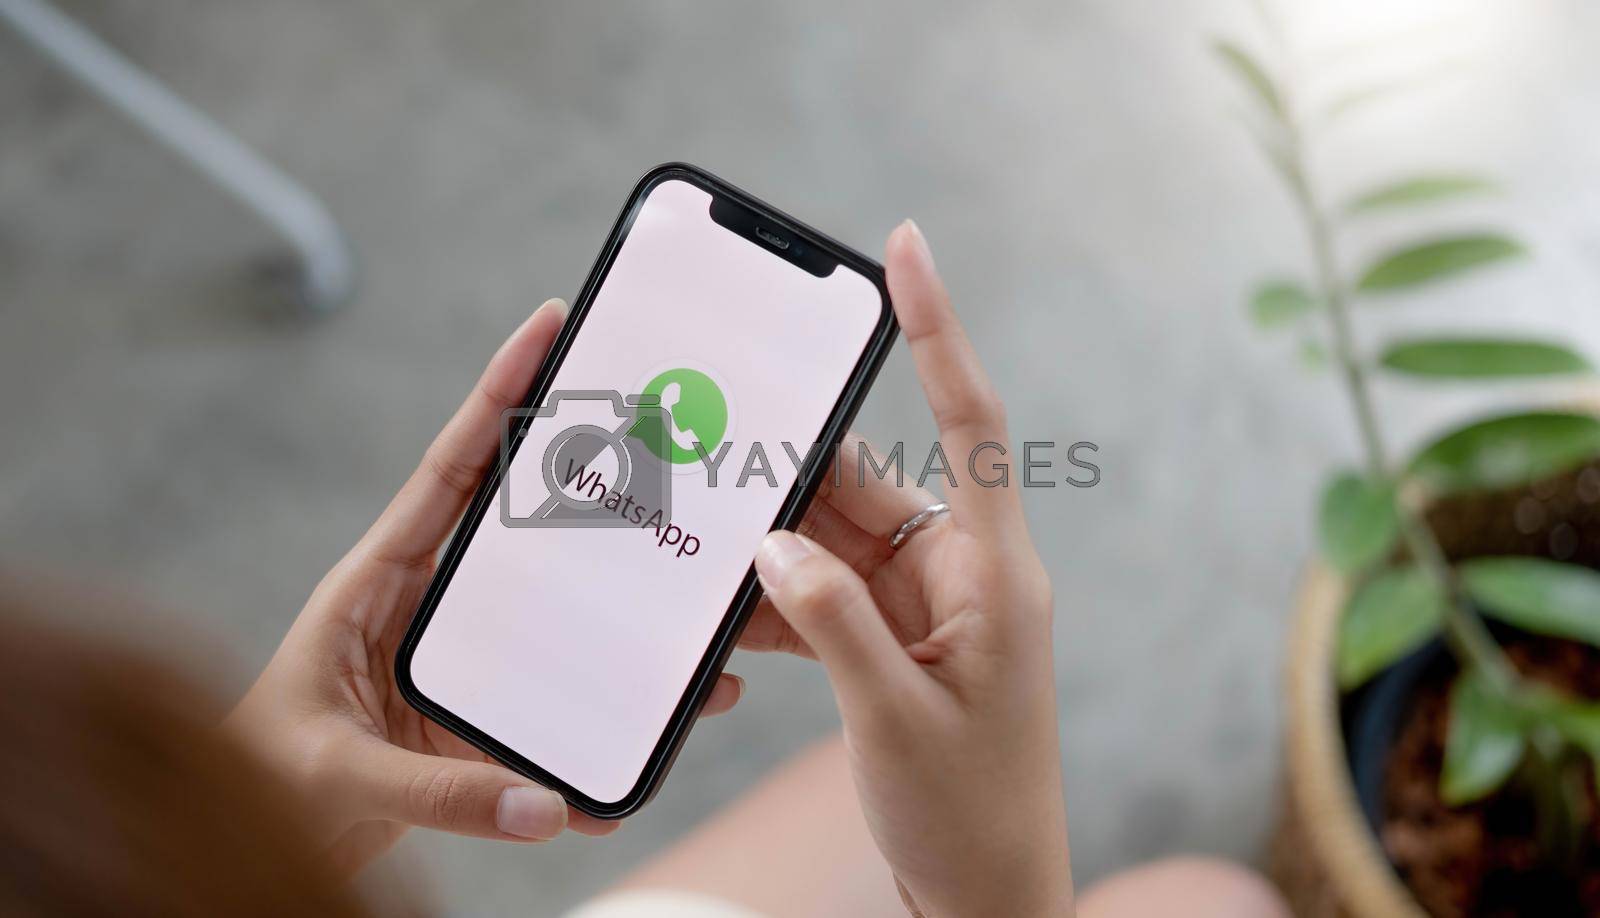 Royalty free image of CHIANG MAI, THAILAND - JUL 10 2022 : Man holding a iPhone and open appstore searching social Internet service WhatsApp on the screen. iPhone was created and developed by the Apple inc. by wichayada